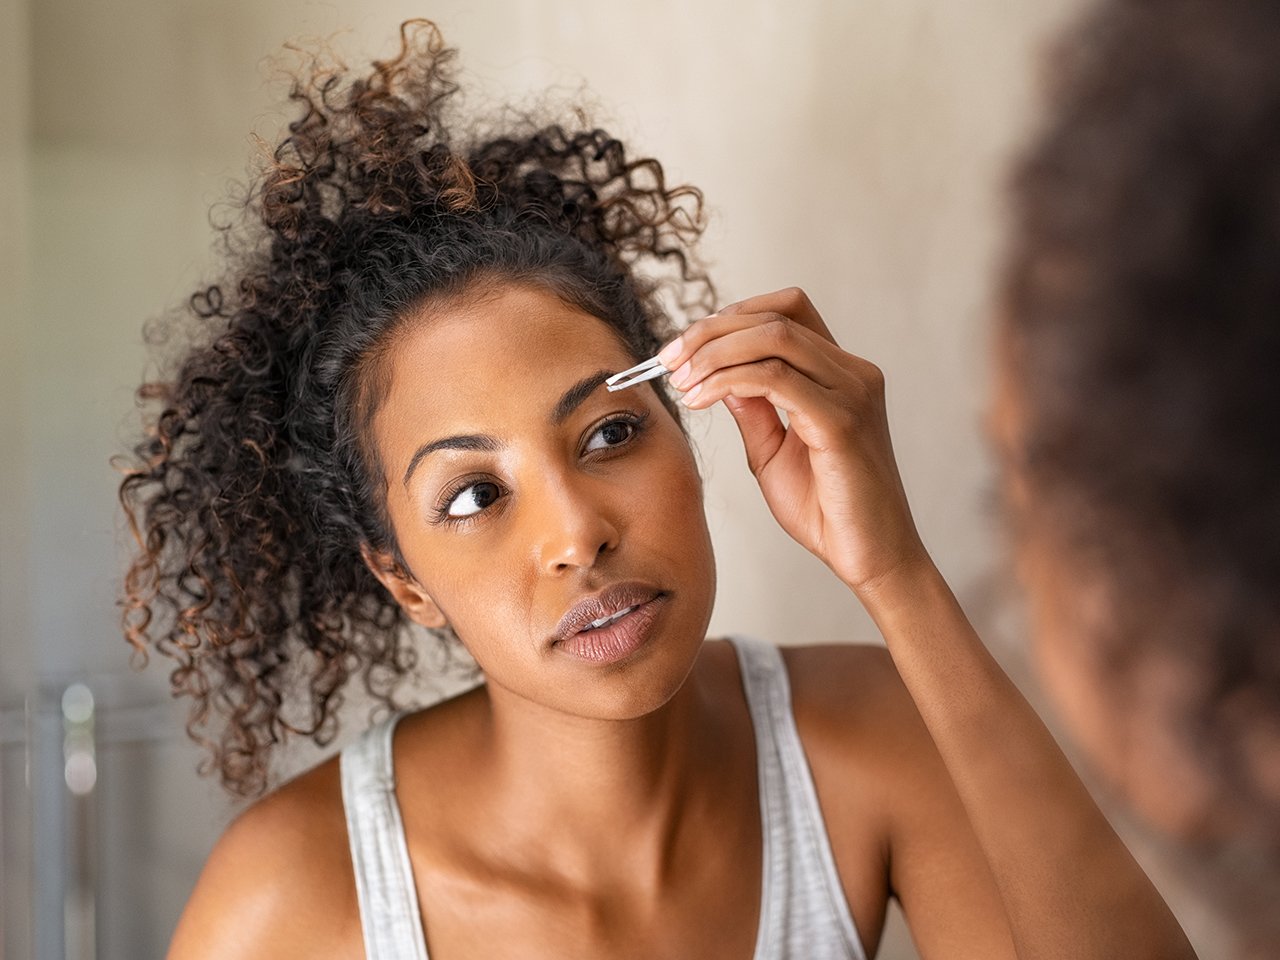 A woman plucking her eyebrows in the mirror to illustrate an article about how to do your eyebrows at home.